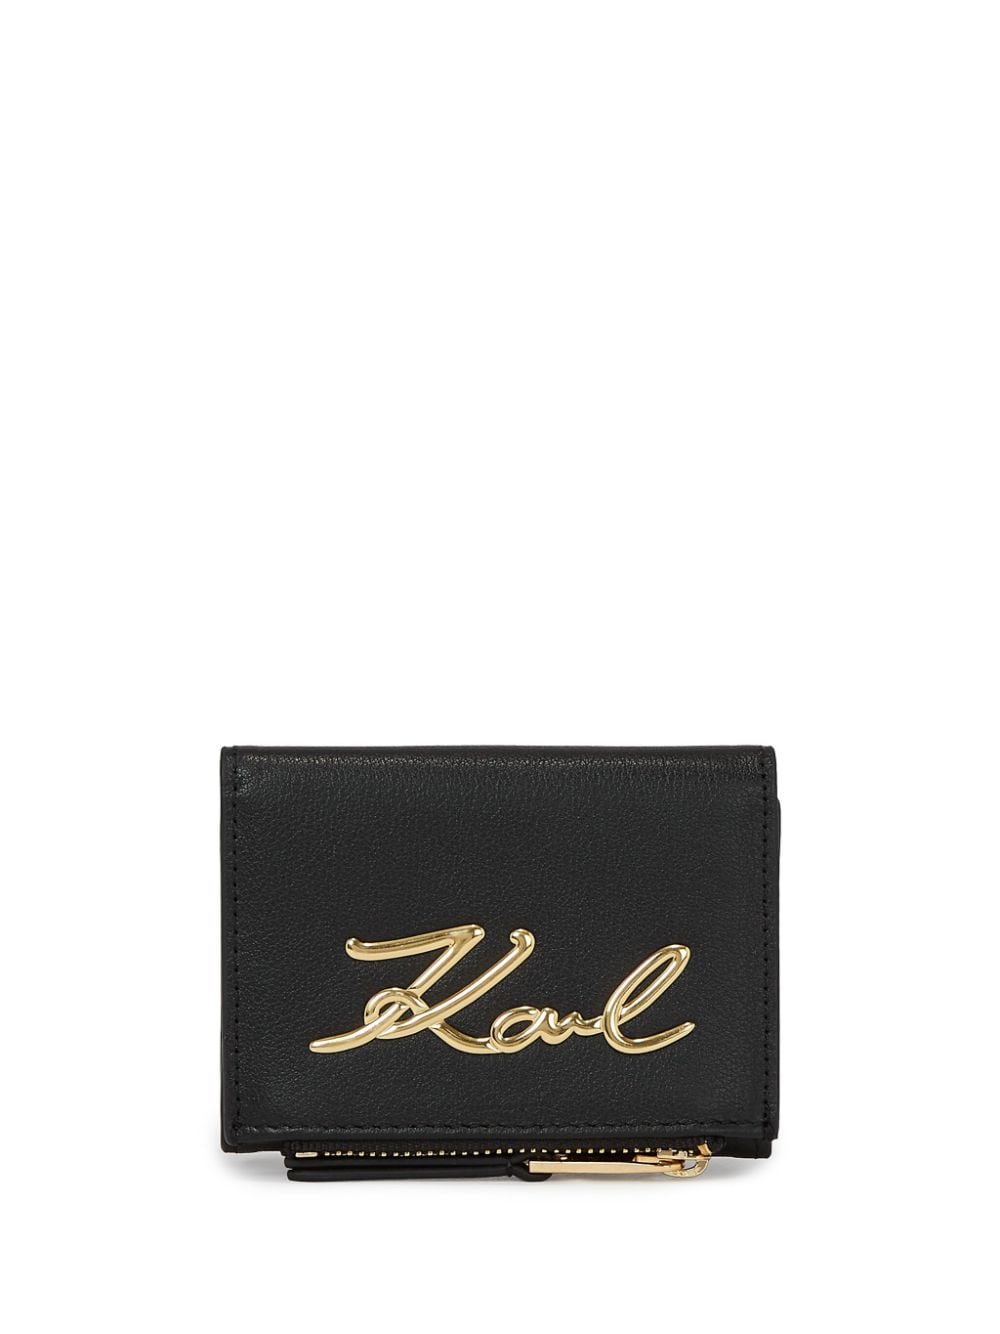 Karl Lagerfeld Signature Tri-fold Leather Wallet In Black